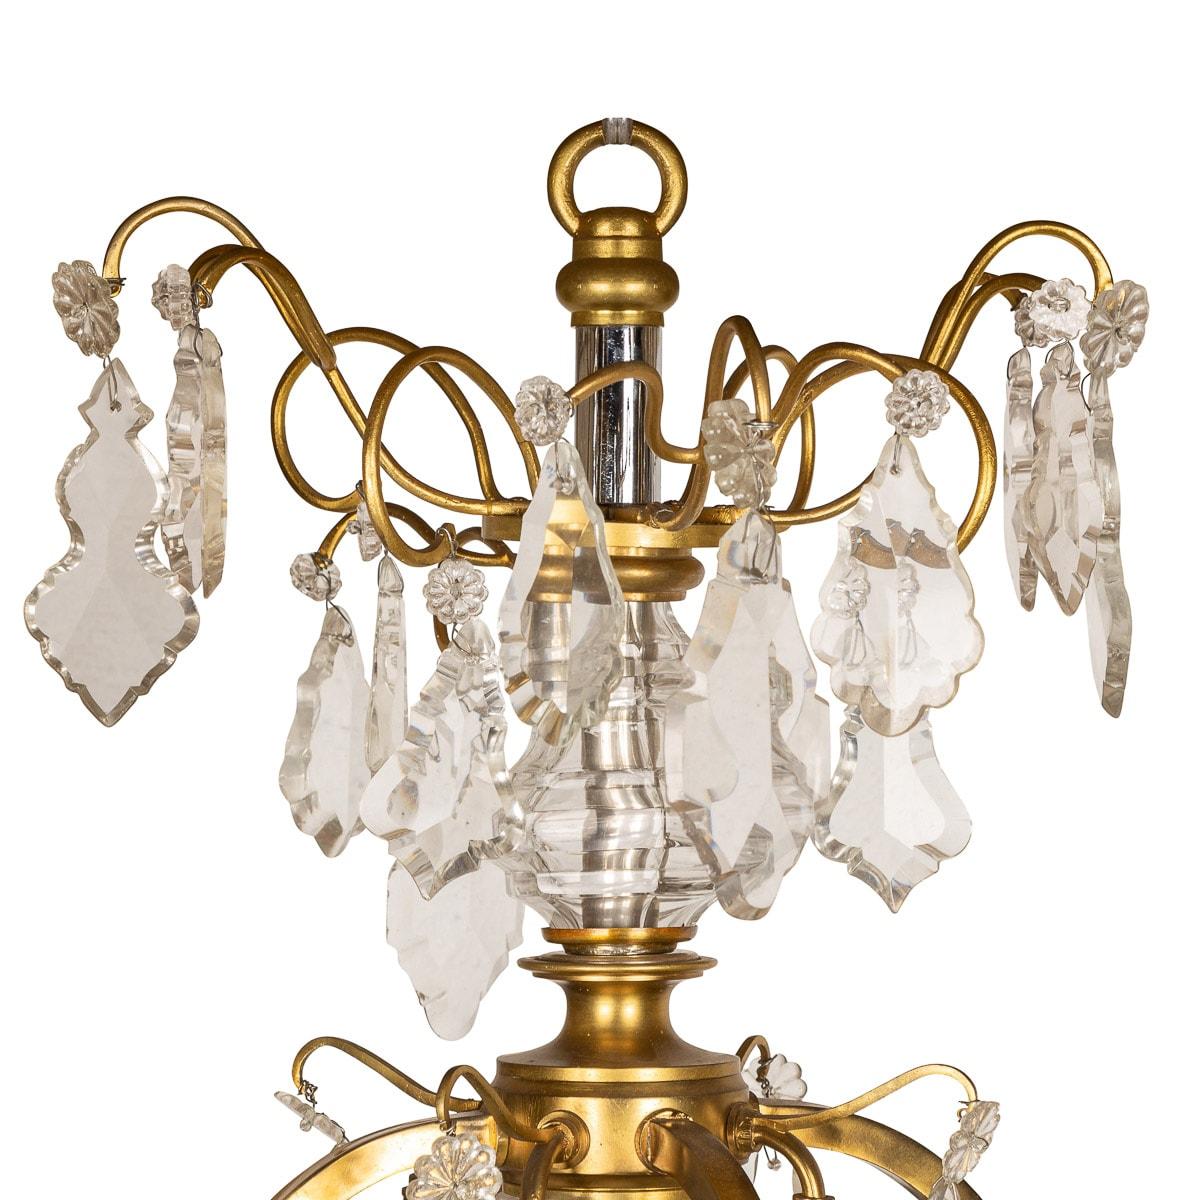 Antique 19th Century French very fine chandelier composed of ormolu bronze and cut crystal. Each crystal has been hand cut into lozenge shaped droplets with small flowers above and with a spherical faceted crystal ball underhanging. The chandelier